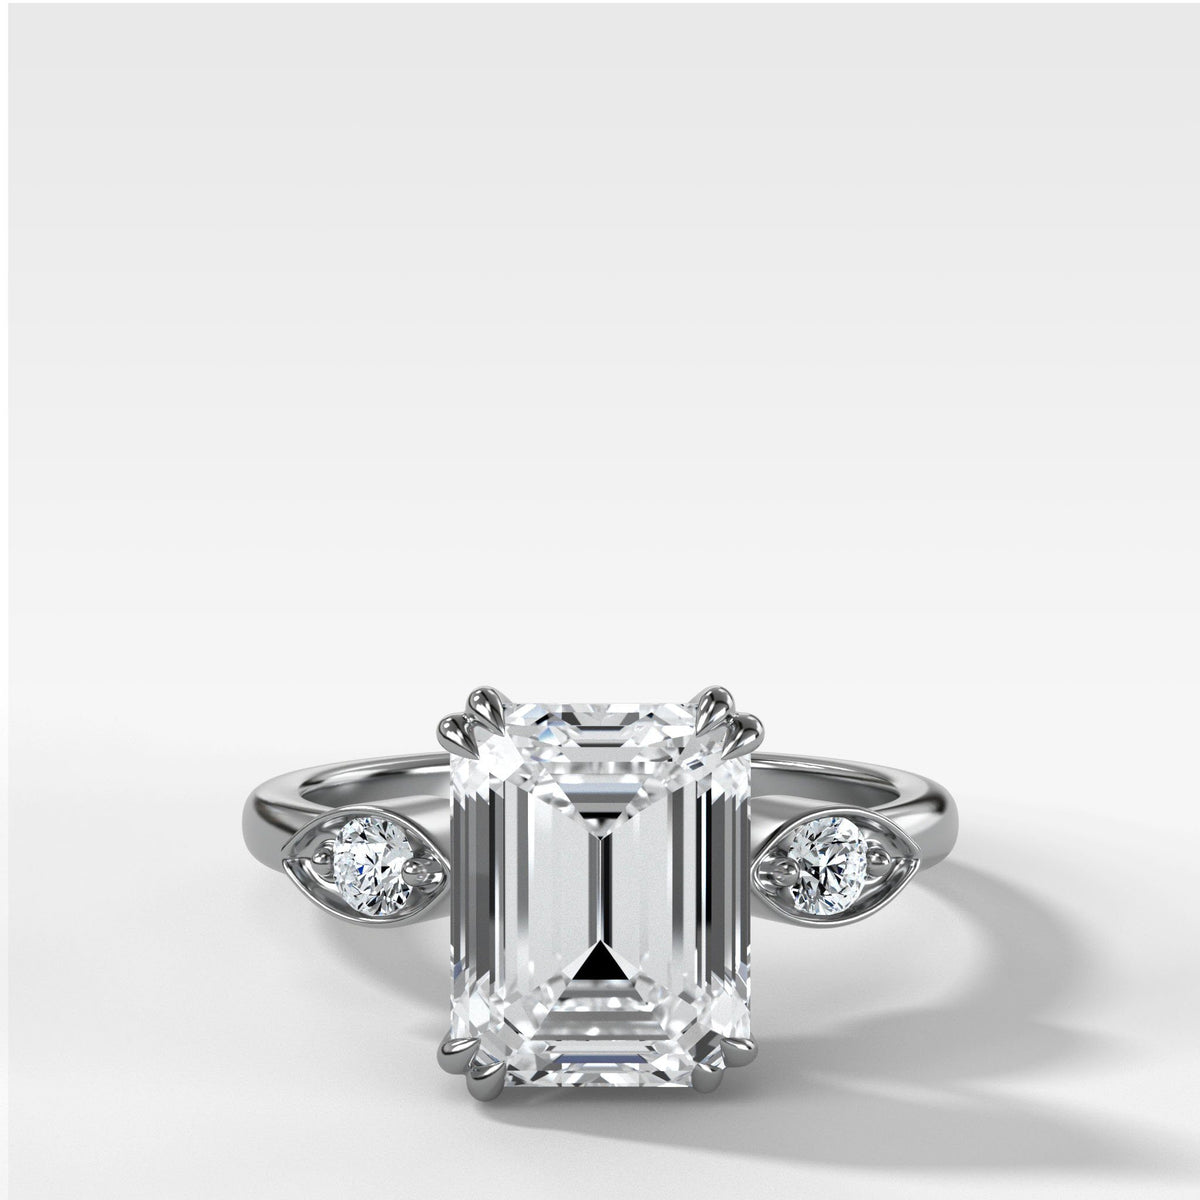 Vintage Ridge Shank Diamond Engagement Ring With Emerald Cut by Good Stone in White Gold